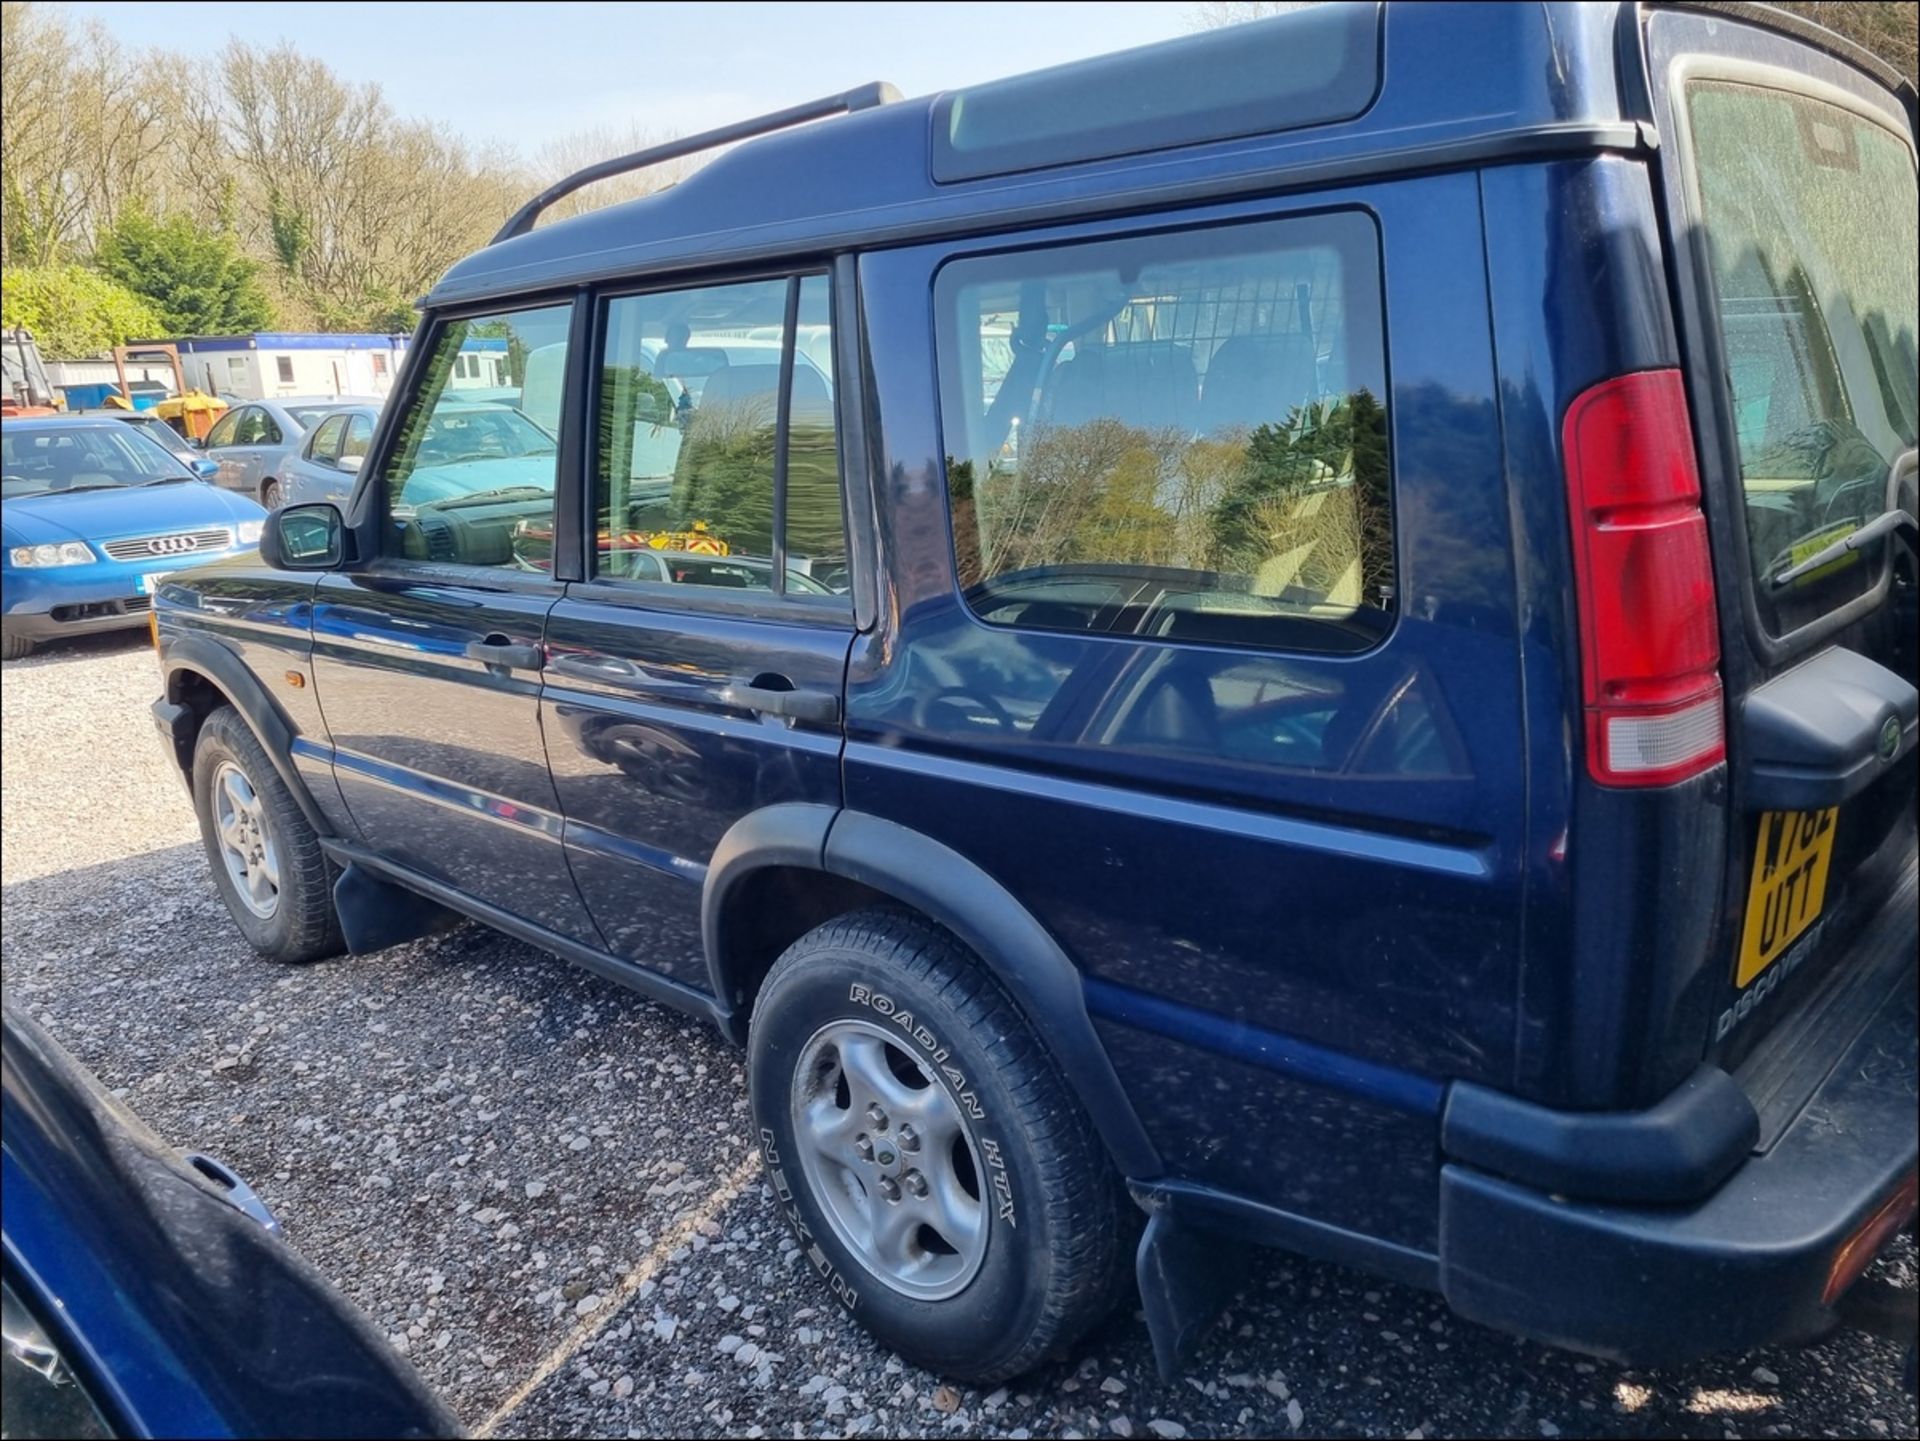 2000 LAND ROVER DISCOVERY - 2500cc 5dr Estate (Blue) - Image 12 of 23